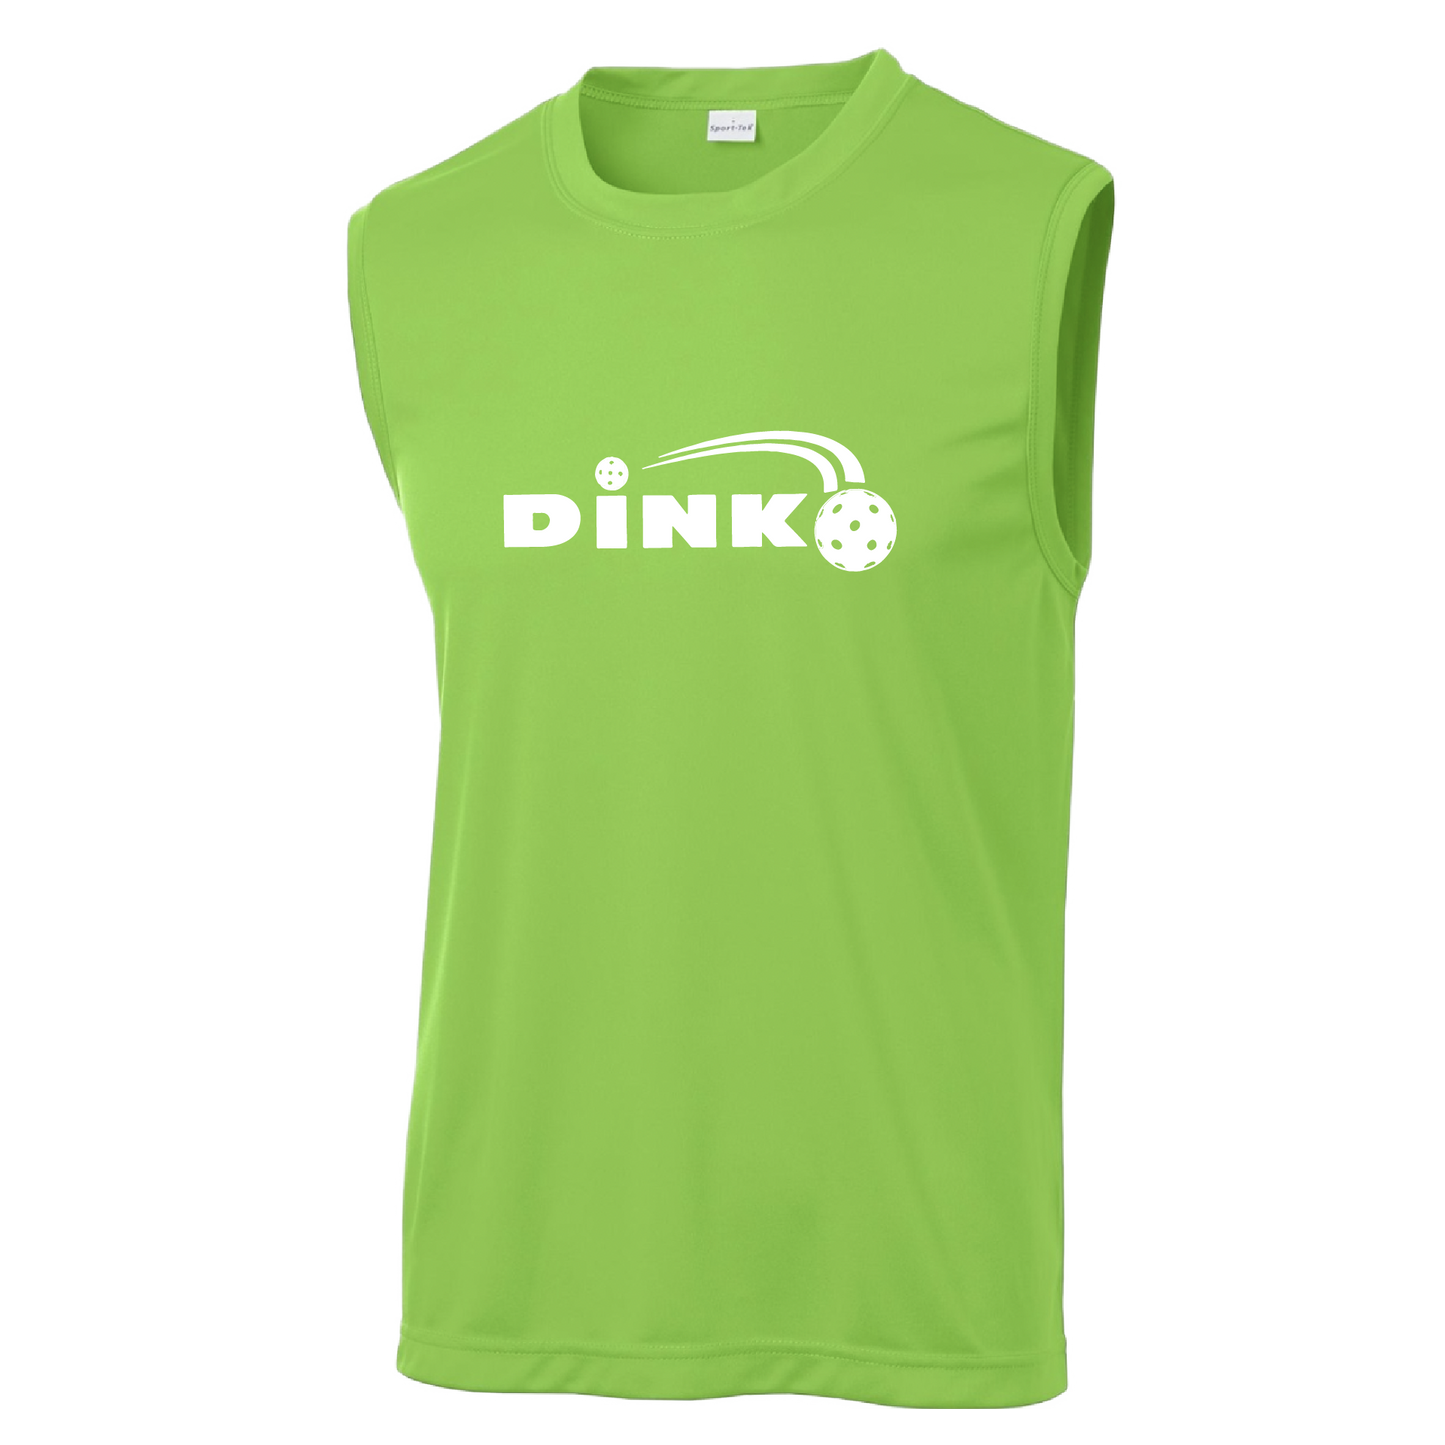 Pickleball Design: Dink  Men's Styles: Sleeveless (SL)  Shirts are lightweight, roomy and highly breathable. These moisture-wicking shirts are designed for athletic performance. They feature PosiCharge technology to lock in color and prevent logos from fading. Removable tag and set-in sleeves for comfort.